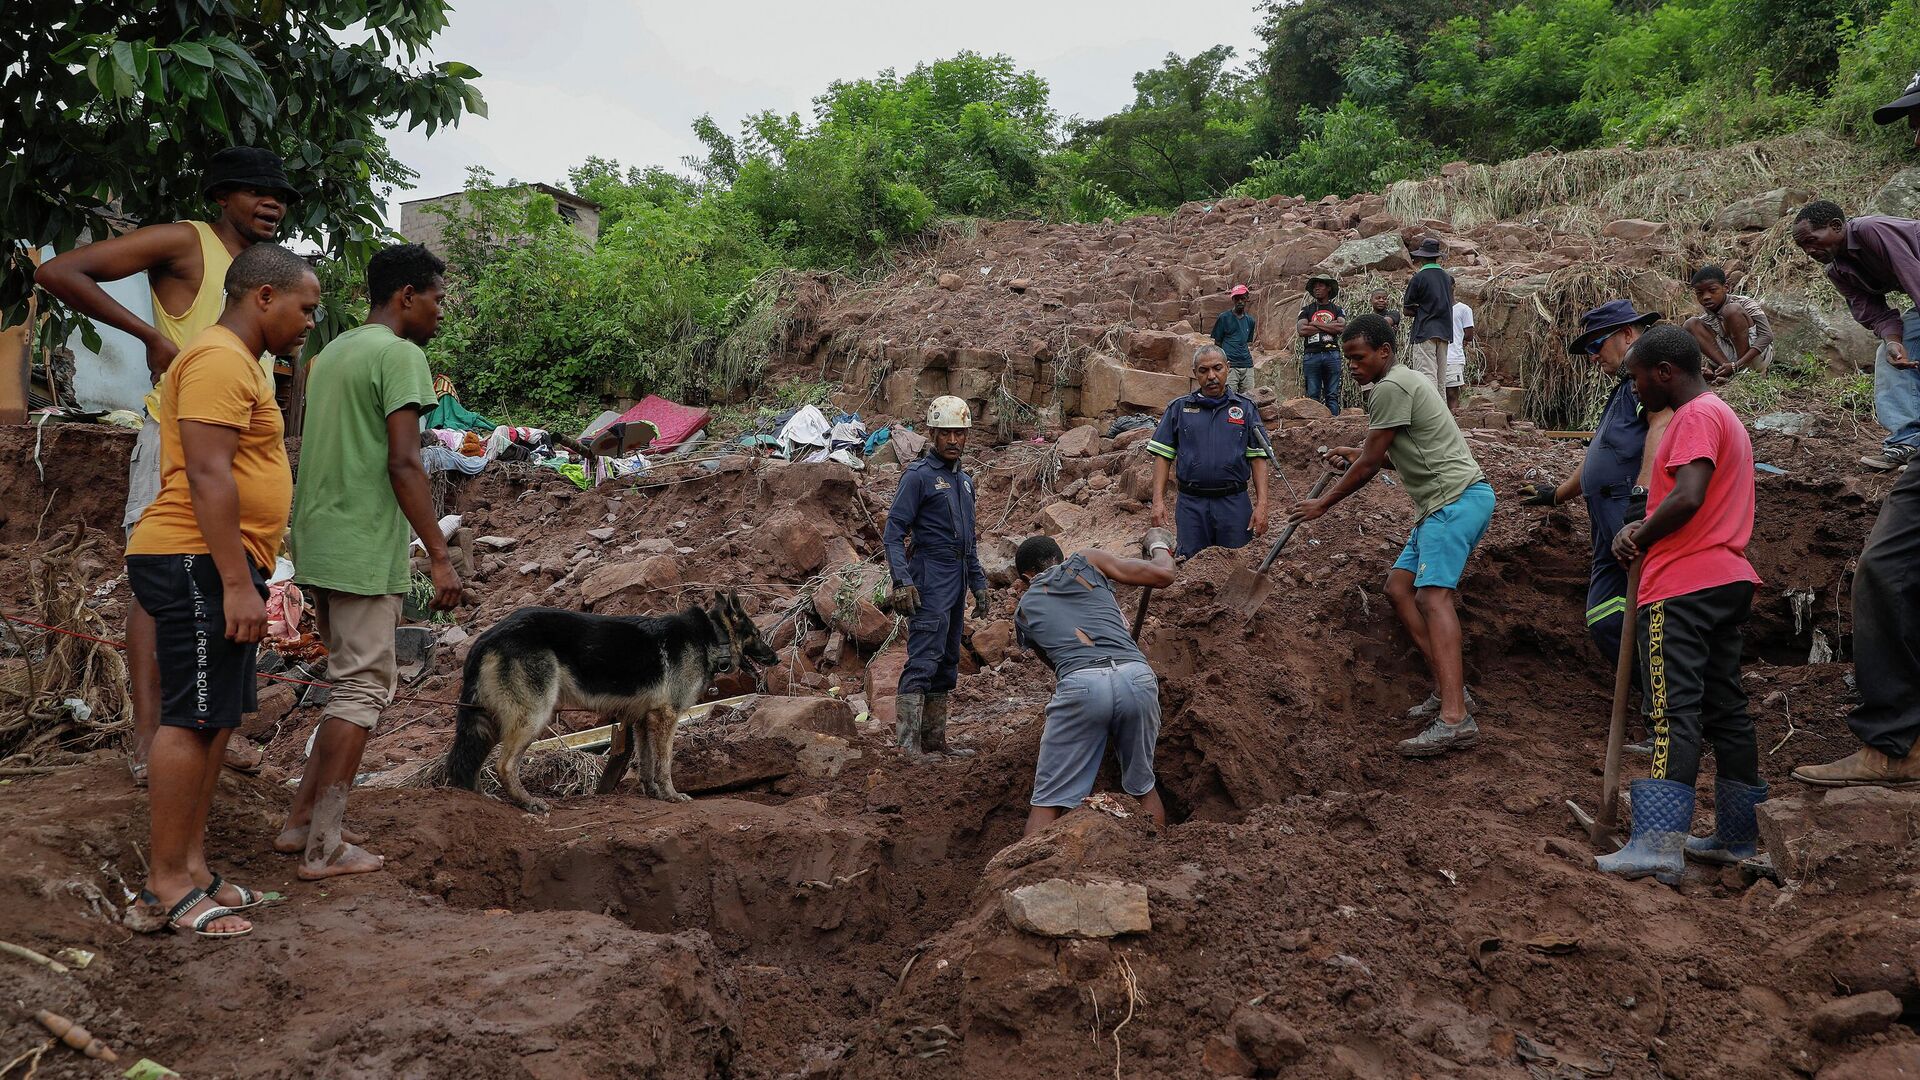 Family members assist with clearing debris for member of the South African Police Services (SAPS) Search and Rescue Unit to conduct search efforts to locate ten people who are unaccounted for from area of KwaNdengezi township outside Durban on April 15, 2022 after their homes were swept away following the devastating rains and flooding. - Sputnik International, 1920, 17.04.2022